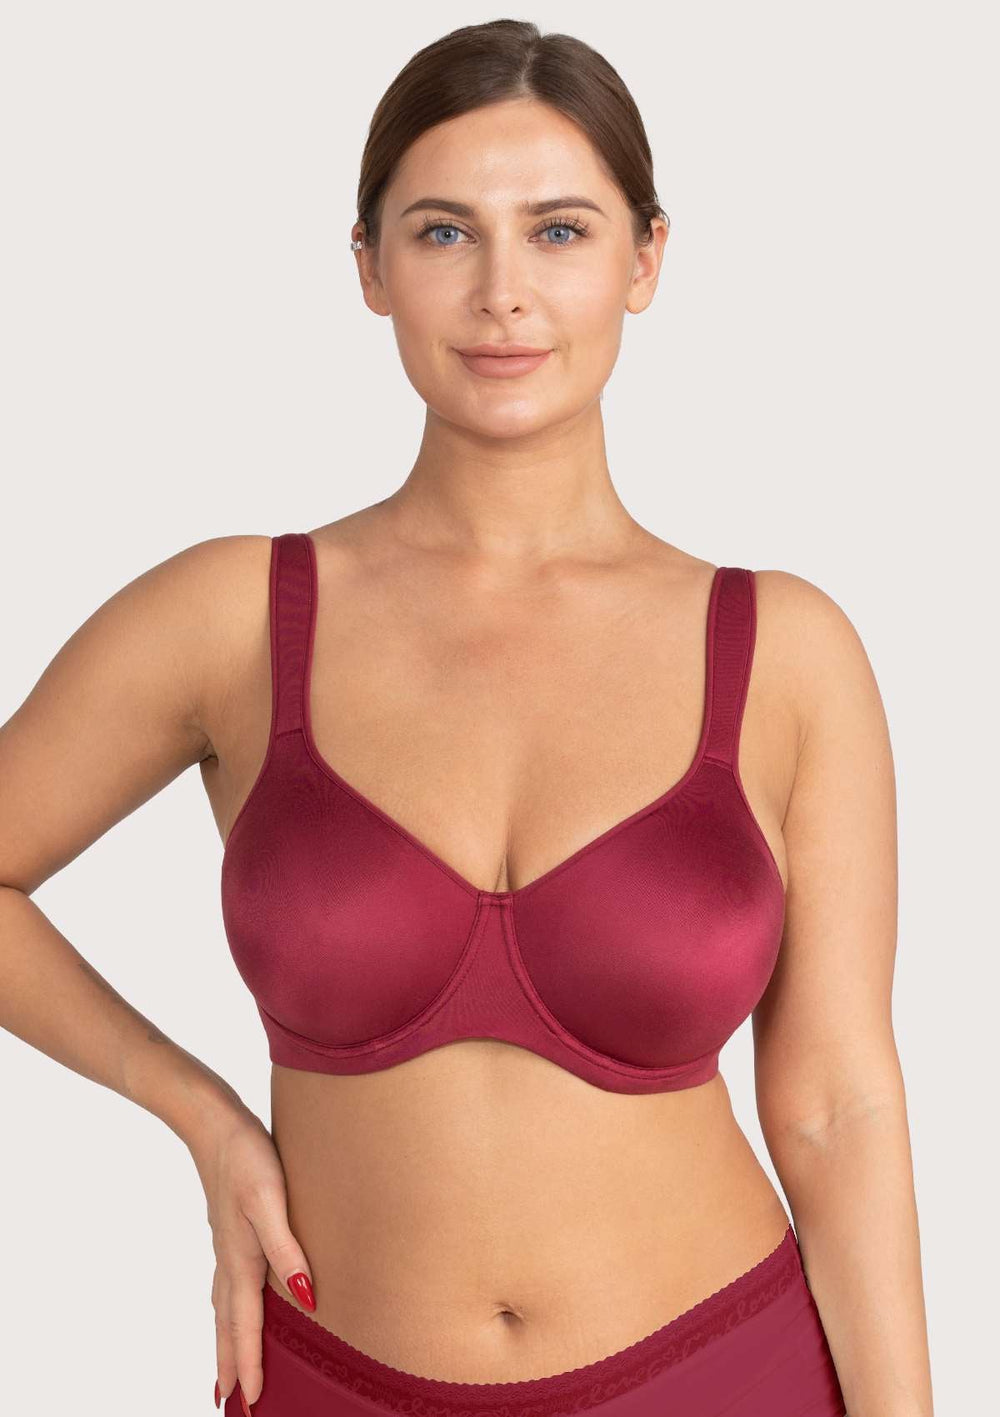 Plus Size Bras 34C, Bras for Large Breasts